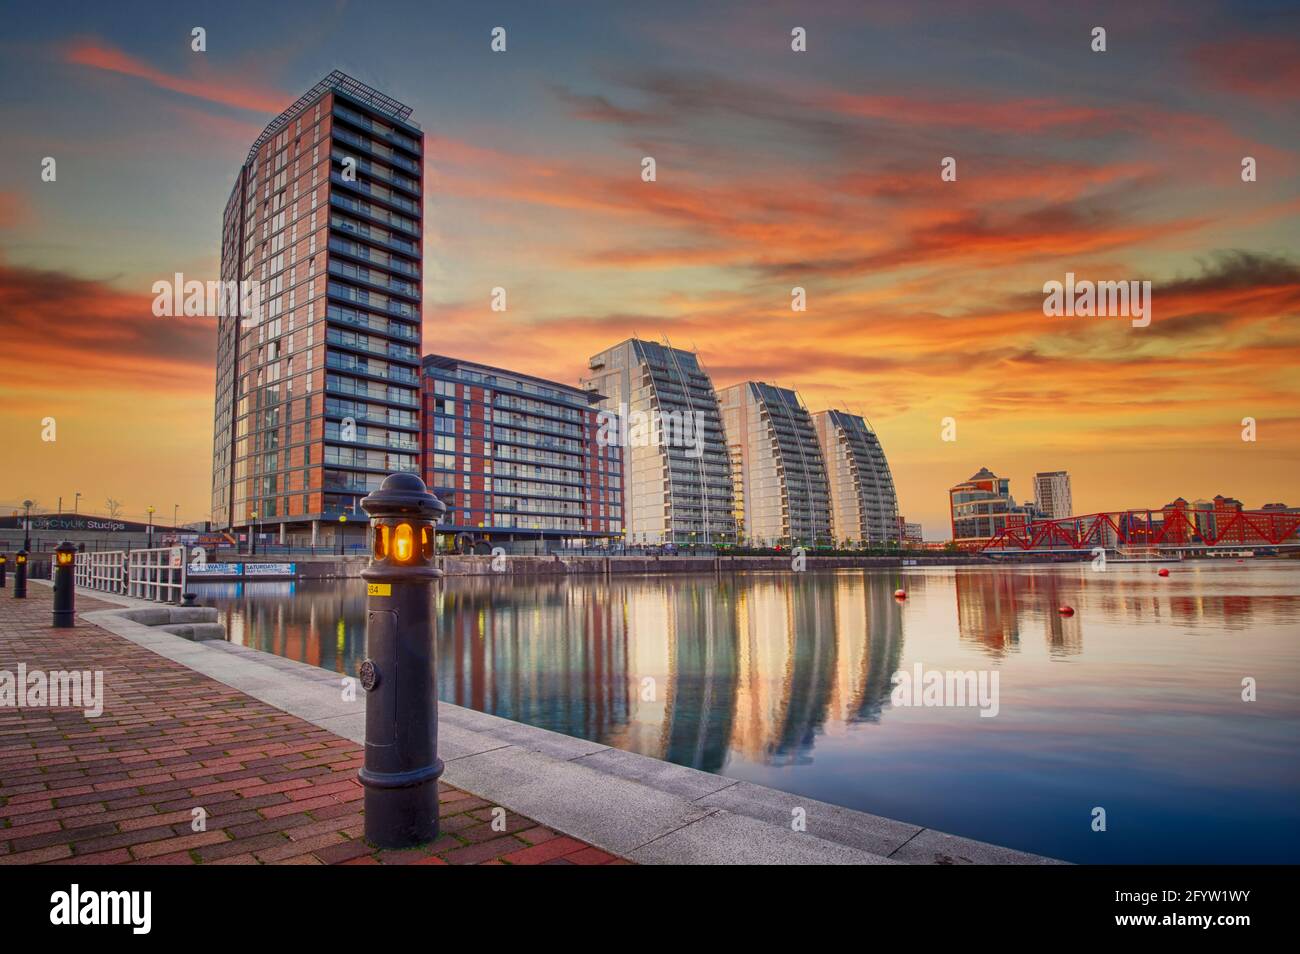 The sun setting over the NV Buildings and one of the docks at Salford Quays, Salford, Lancashire, UK Stock Photo